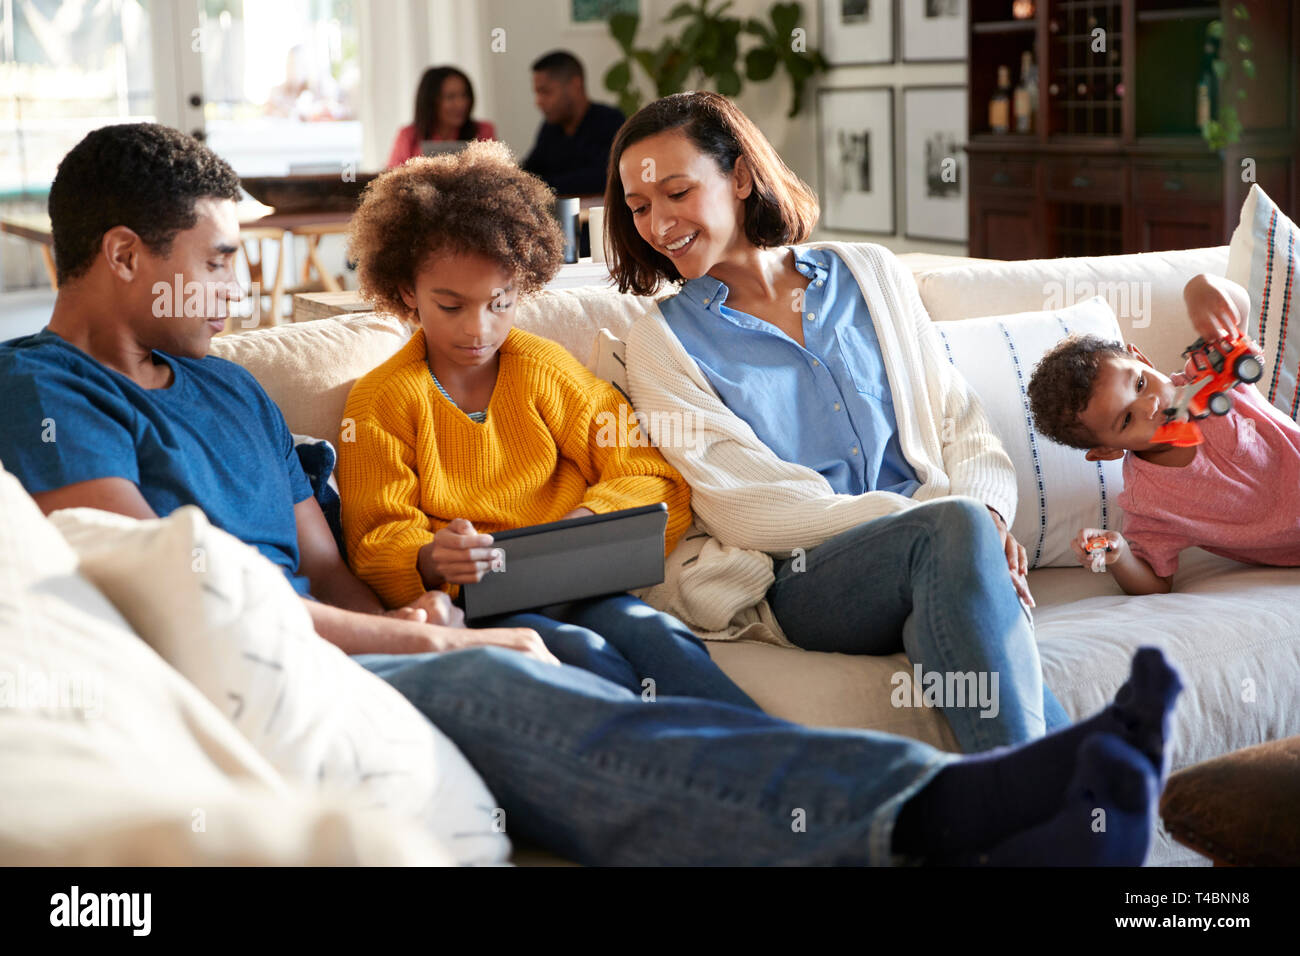 Three generation family family spending time at home in their living room, parents and young kids in the foreground, grandparents in the background, selective focus Stock Photo